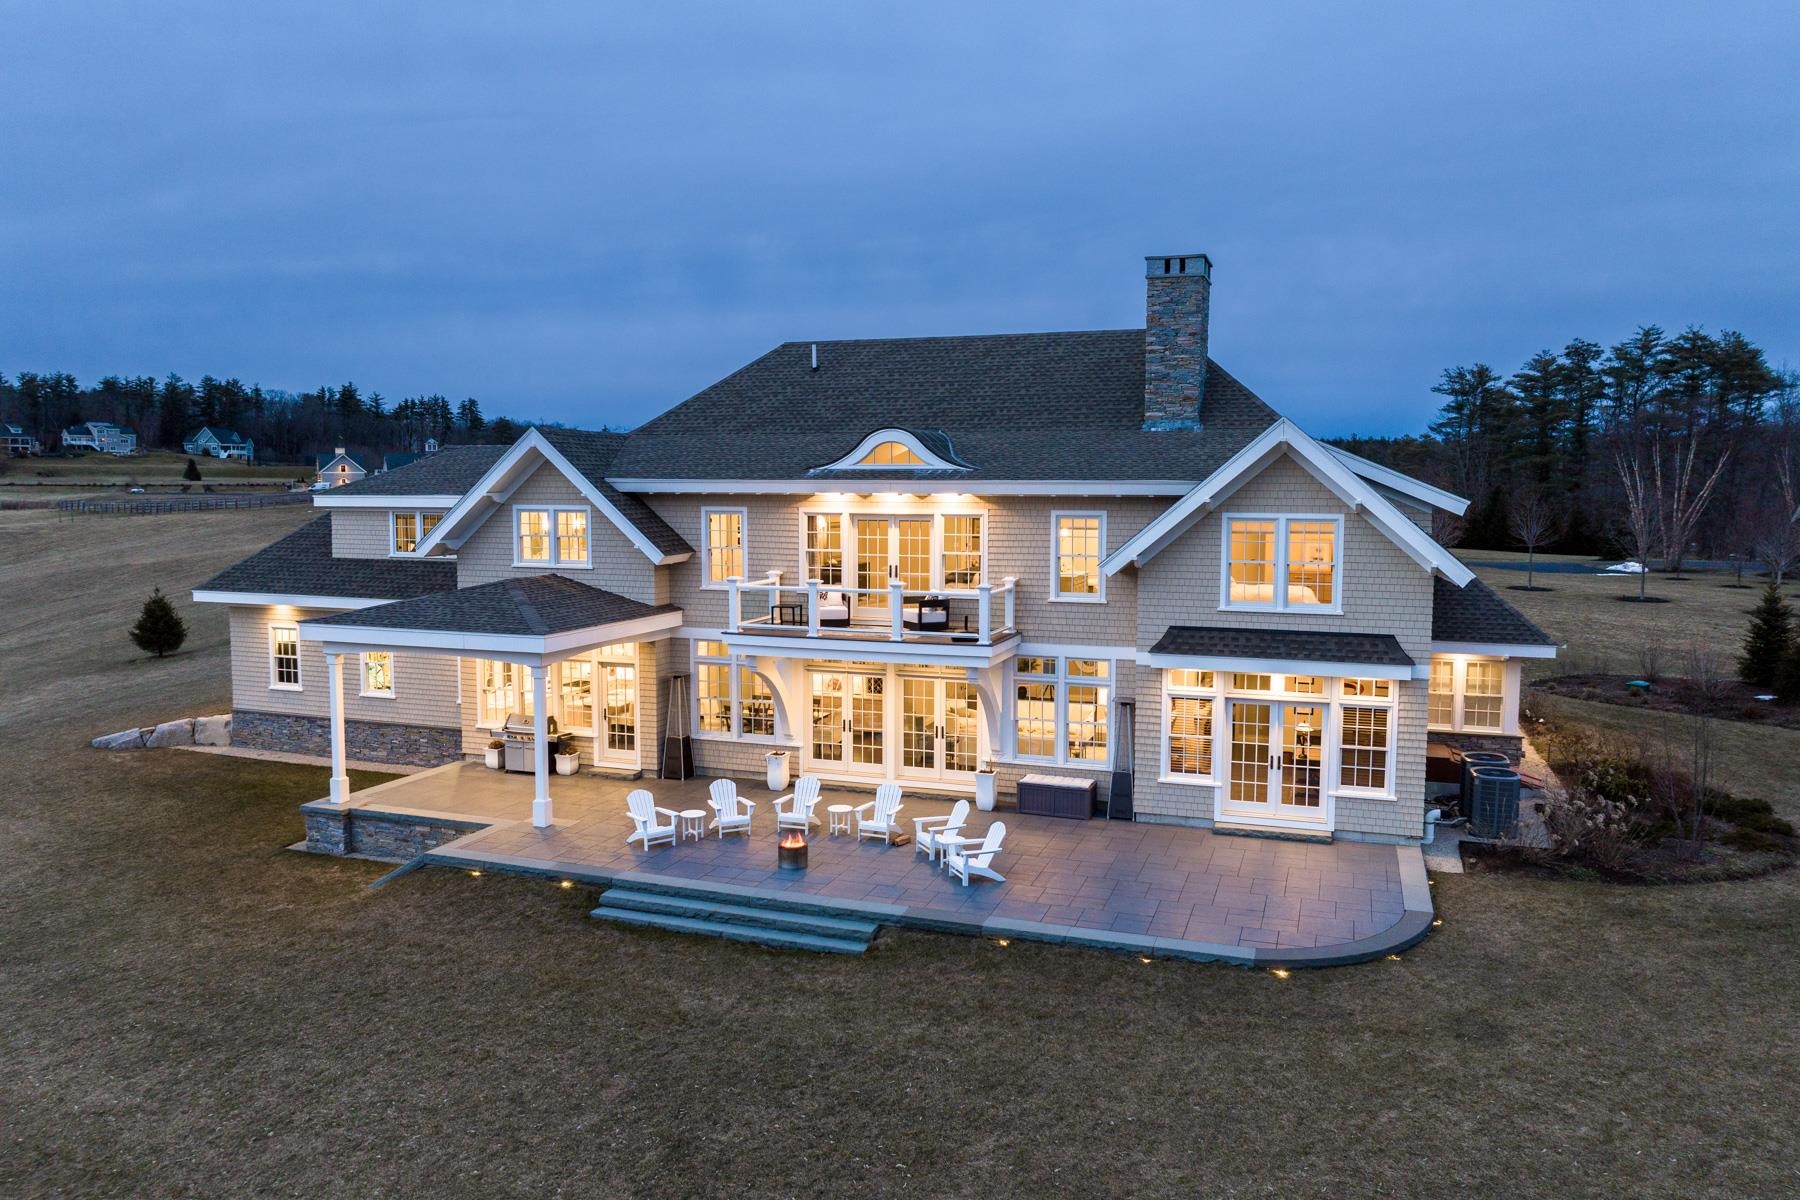 75 SADDLE TRAIL Drive, Dover, NH 